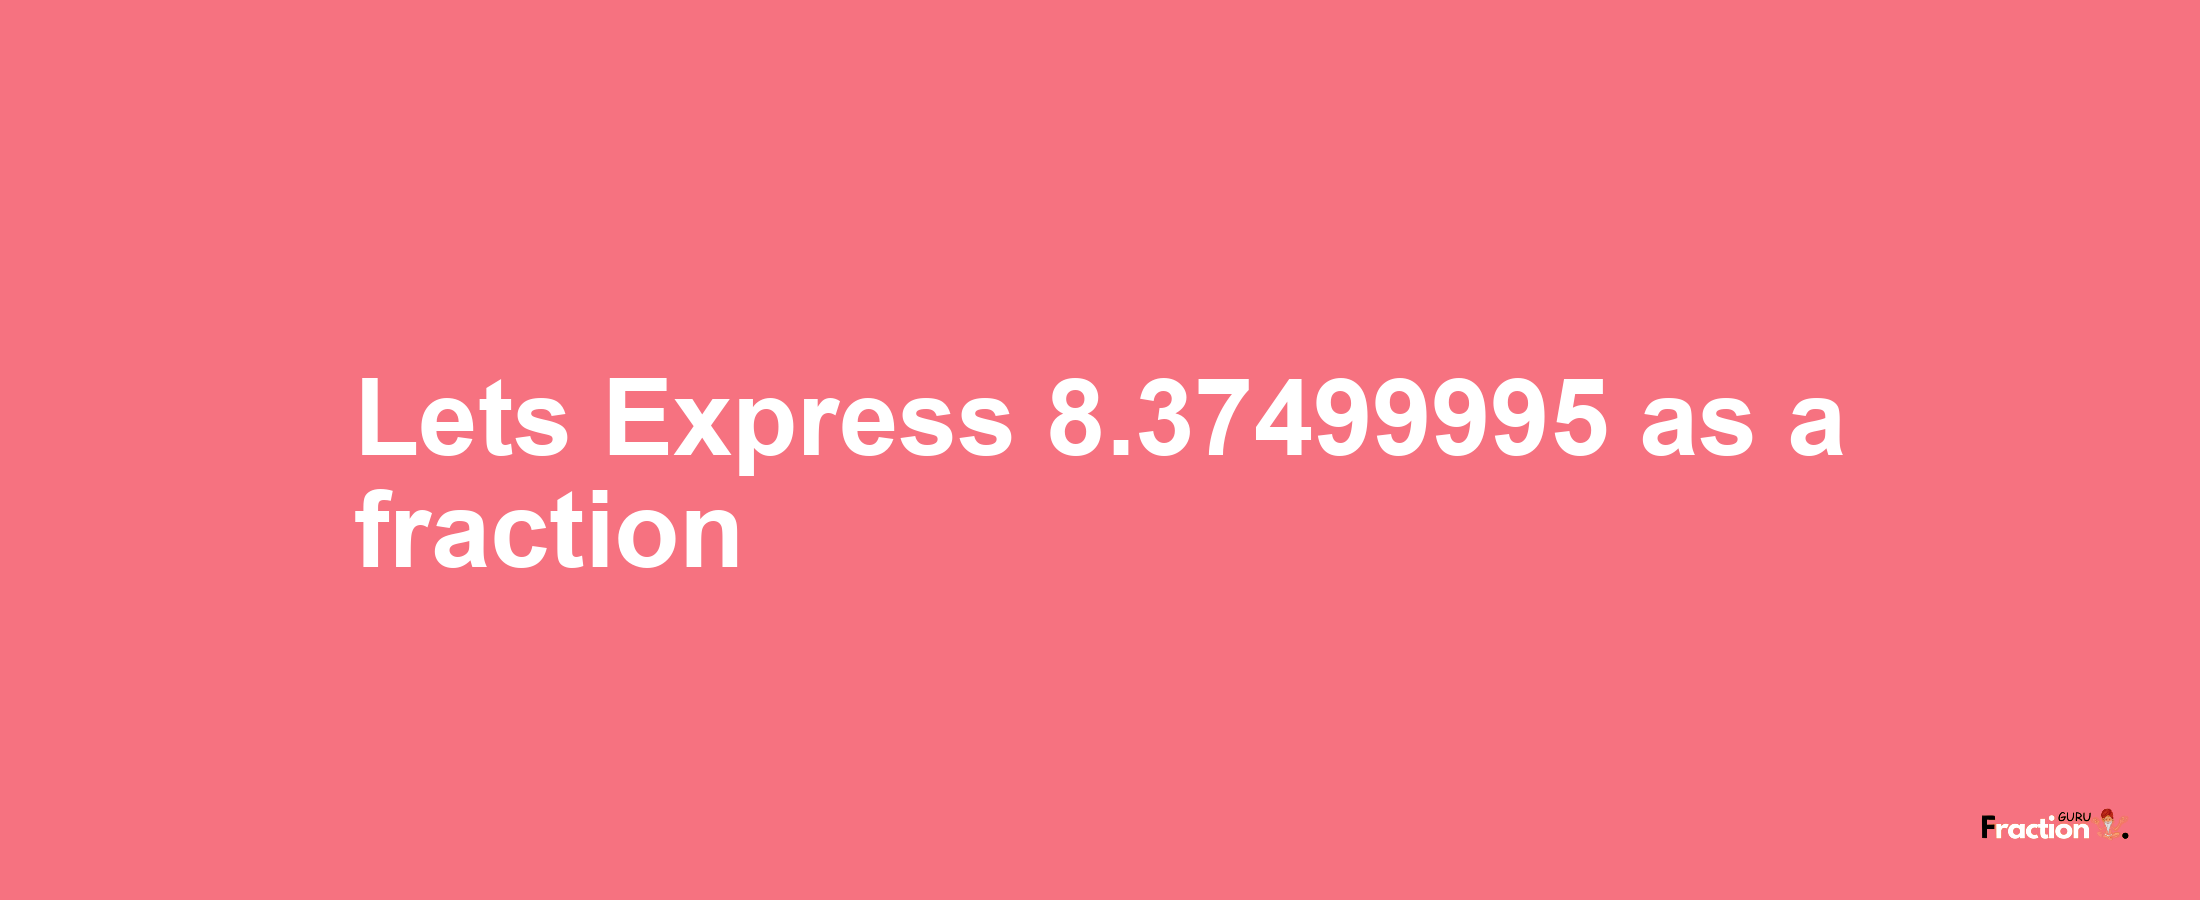 Lets Express 8.37499995 as afraction